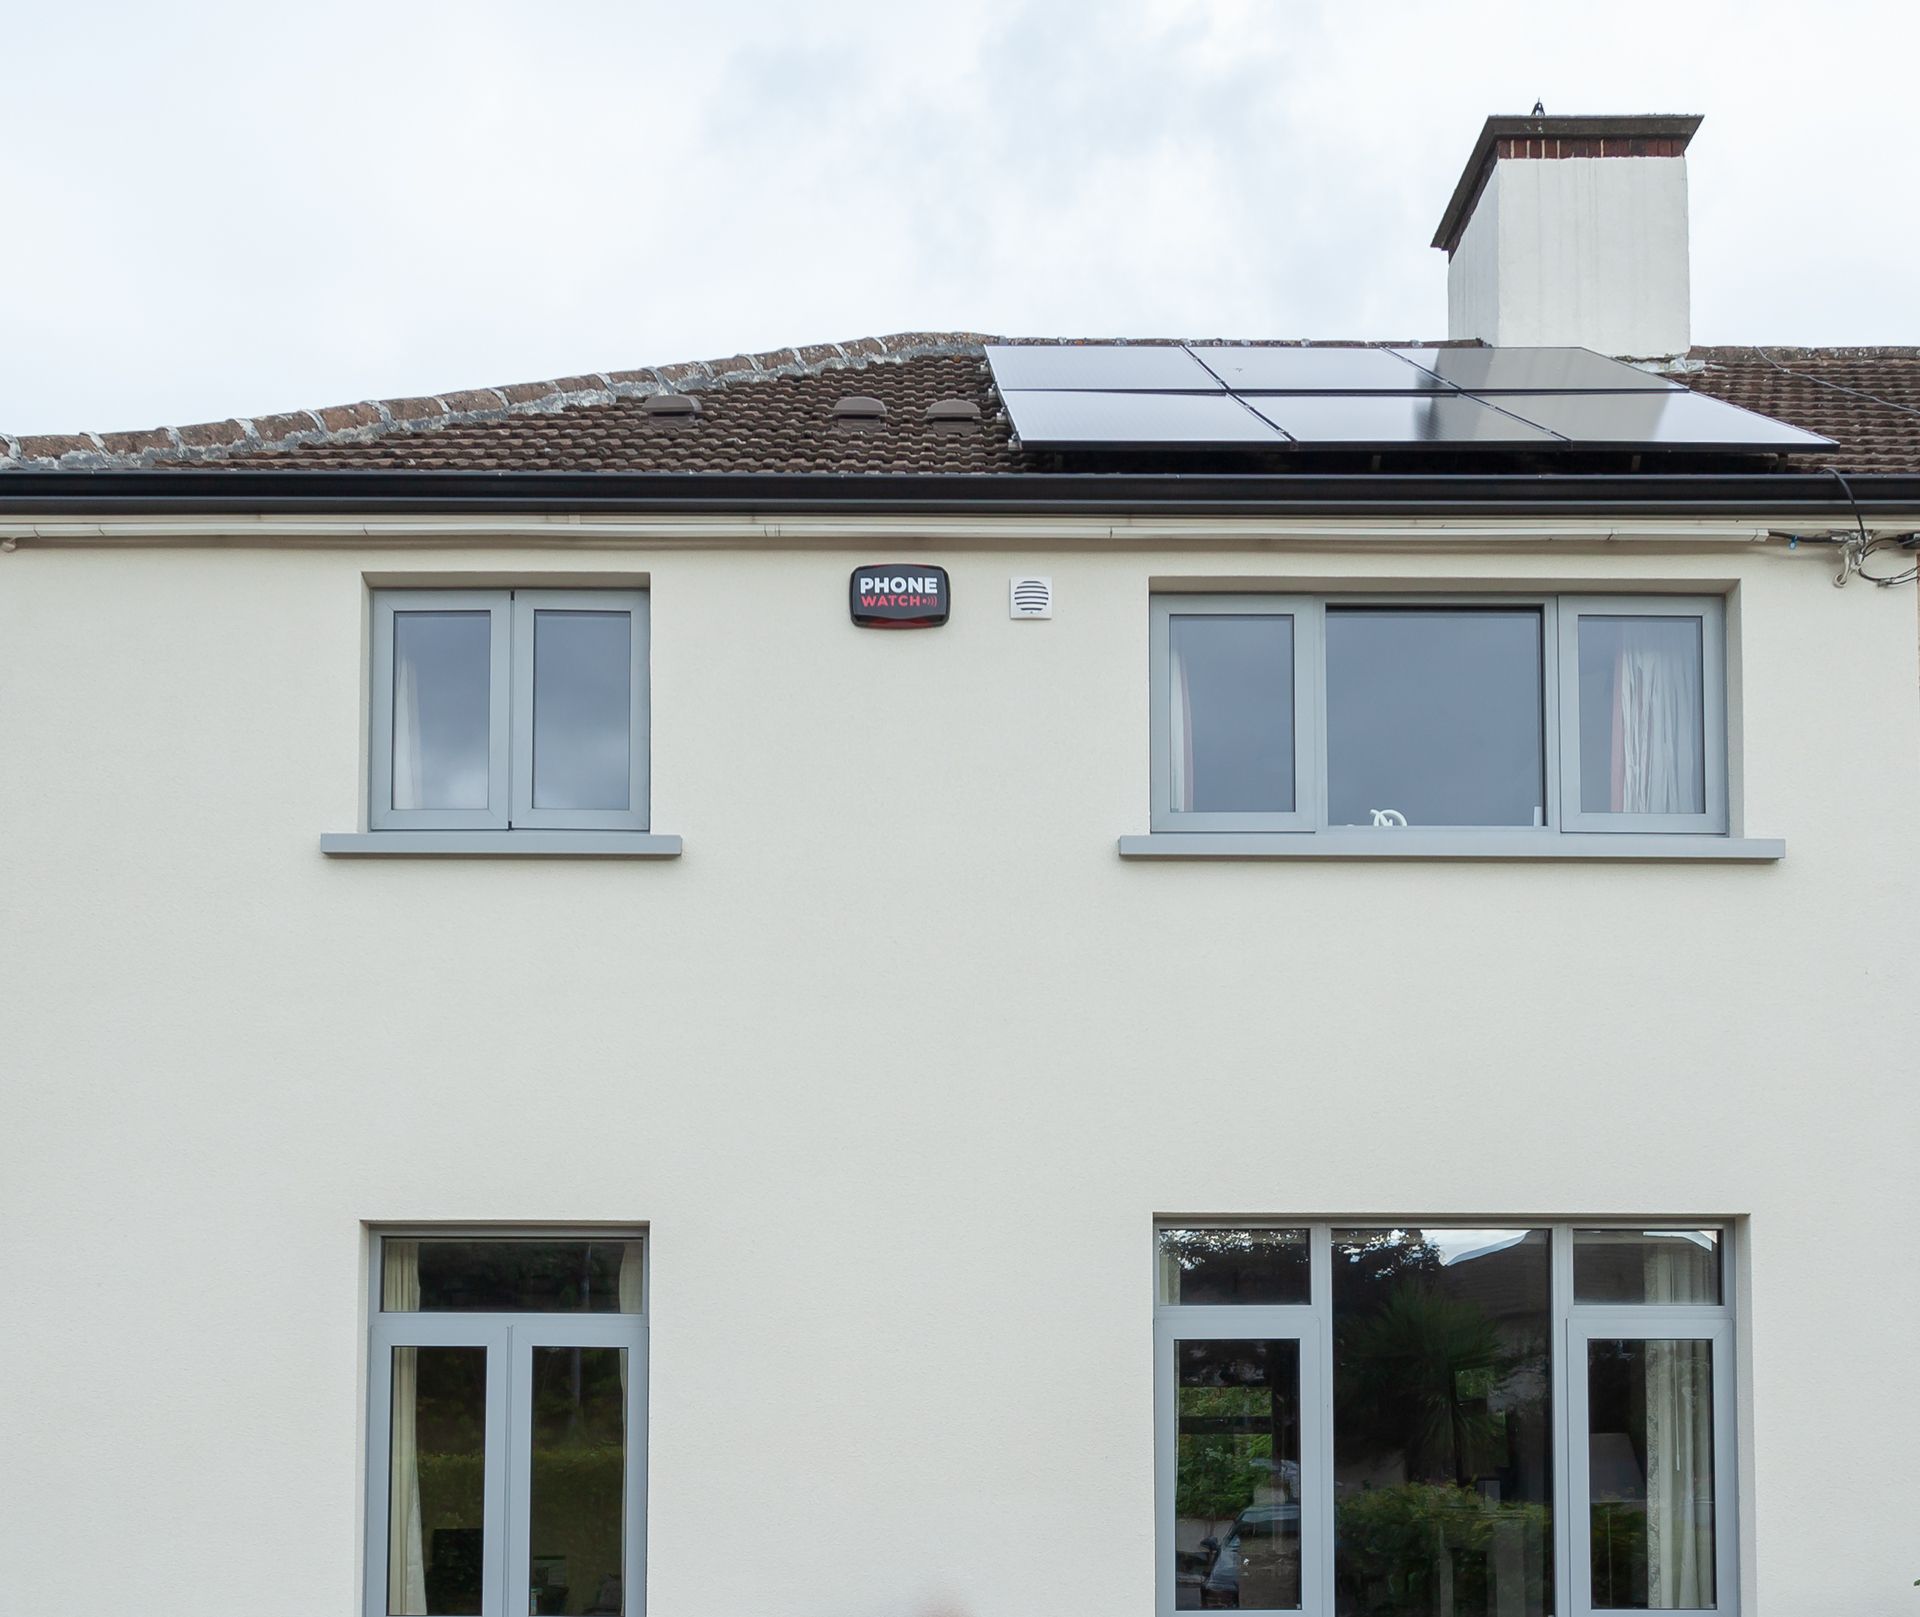 Solar PV panels on top of a roof in Ireland